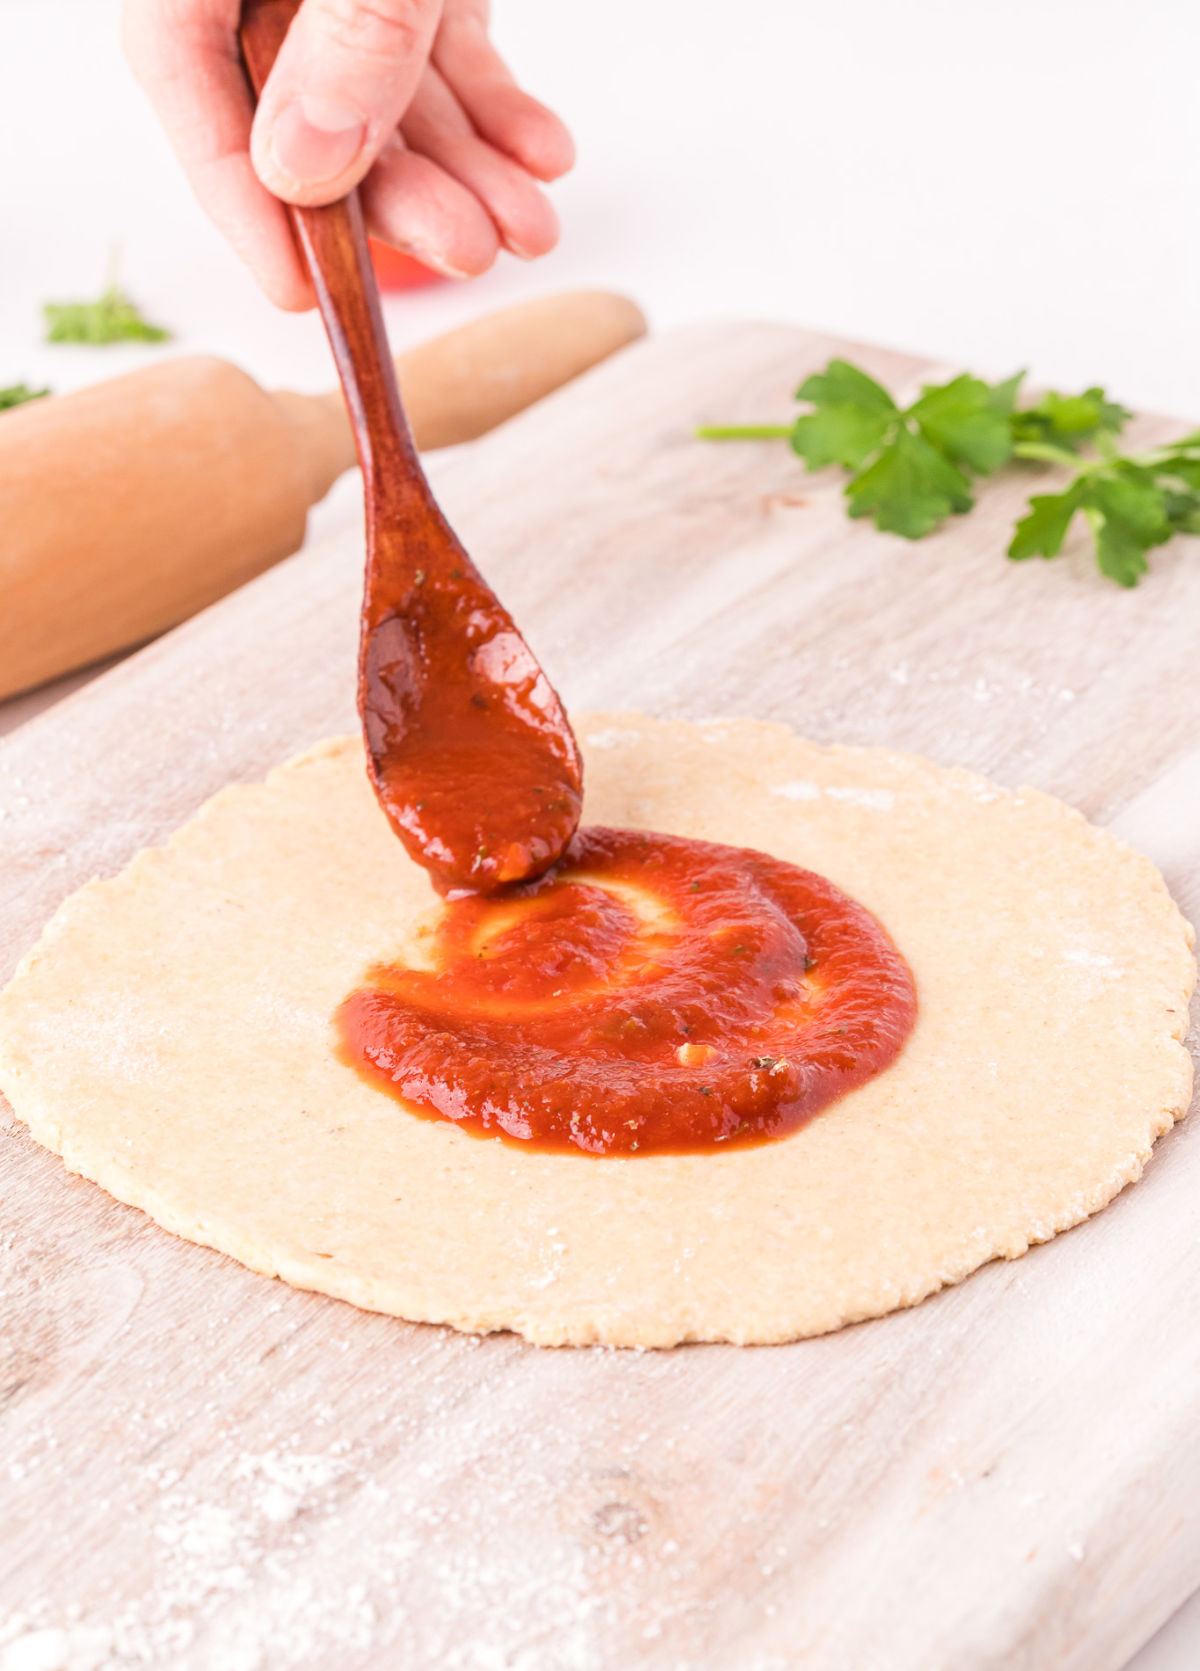 Pizza sauce being spread on pizza dough.